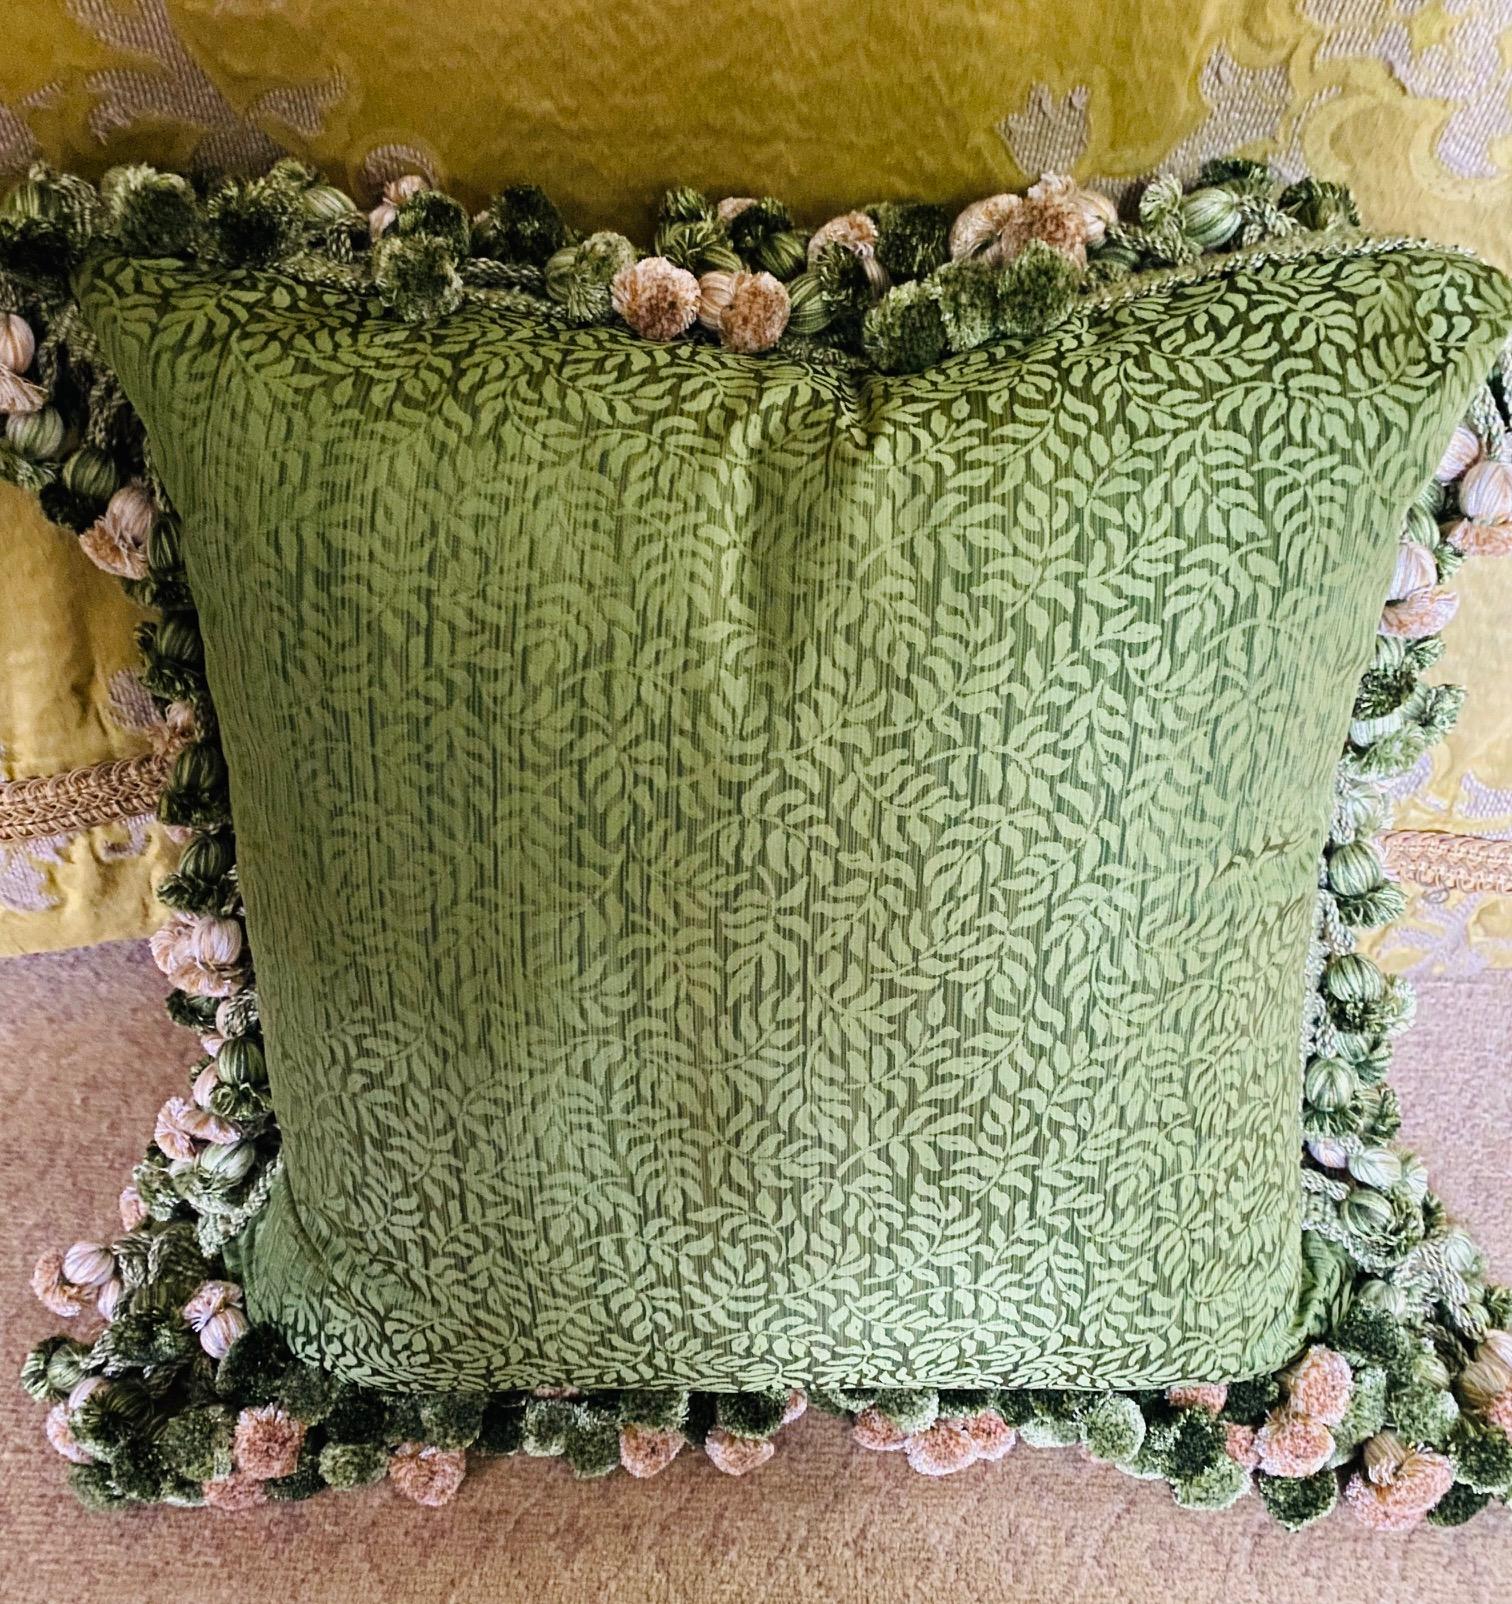 Pair of brilliant green silk down-filled cushions with onion-tassel fringe
Measures: 19